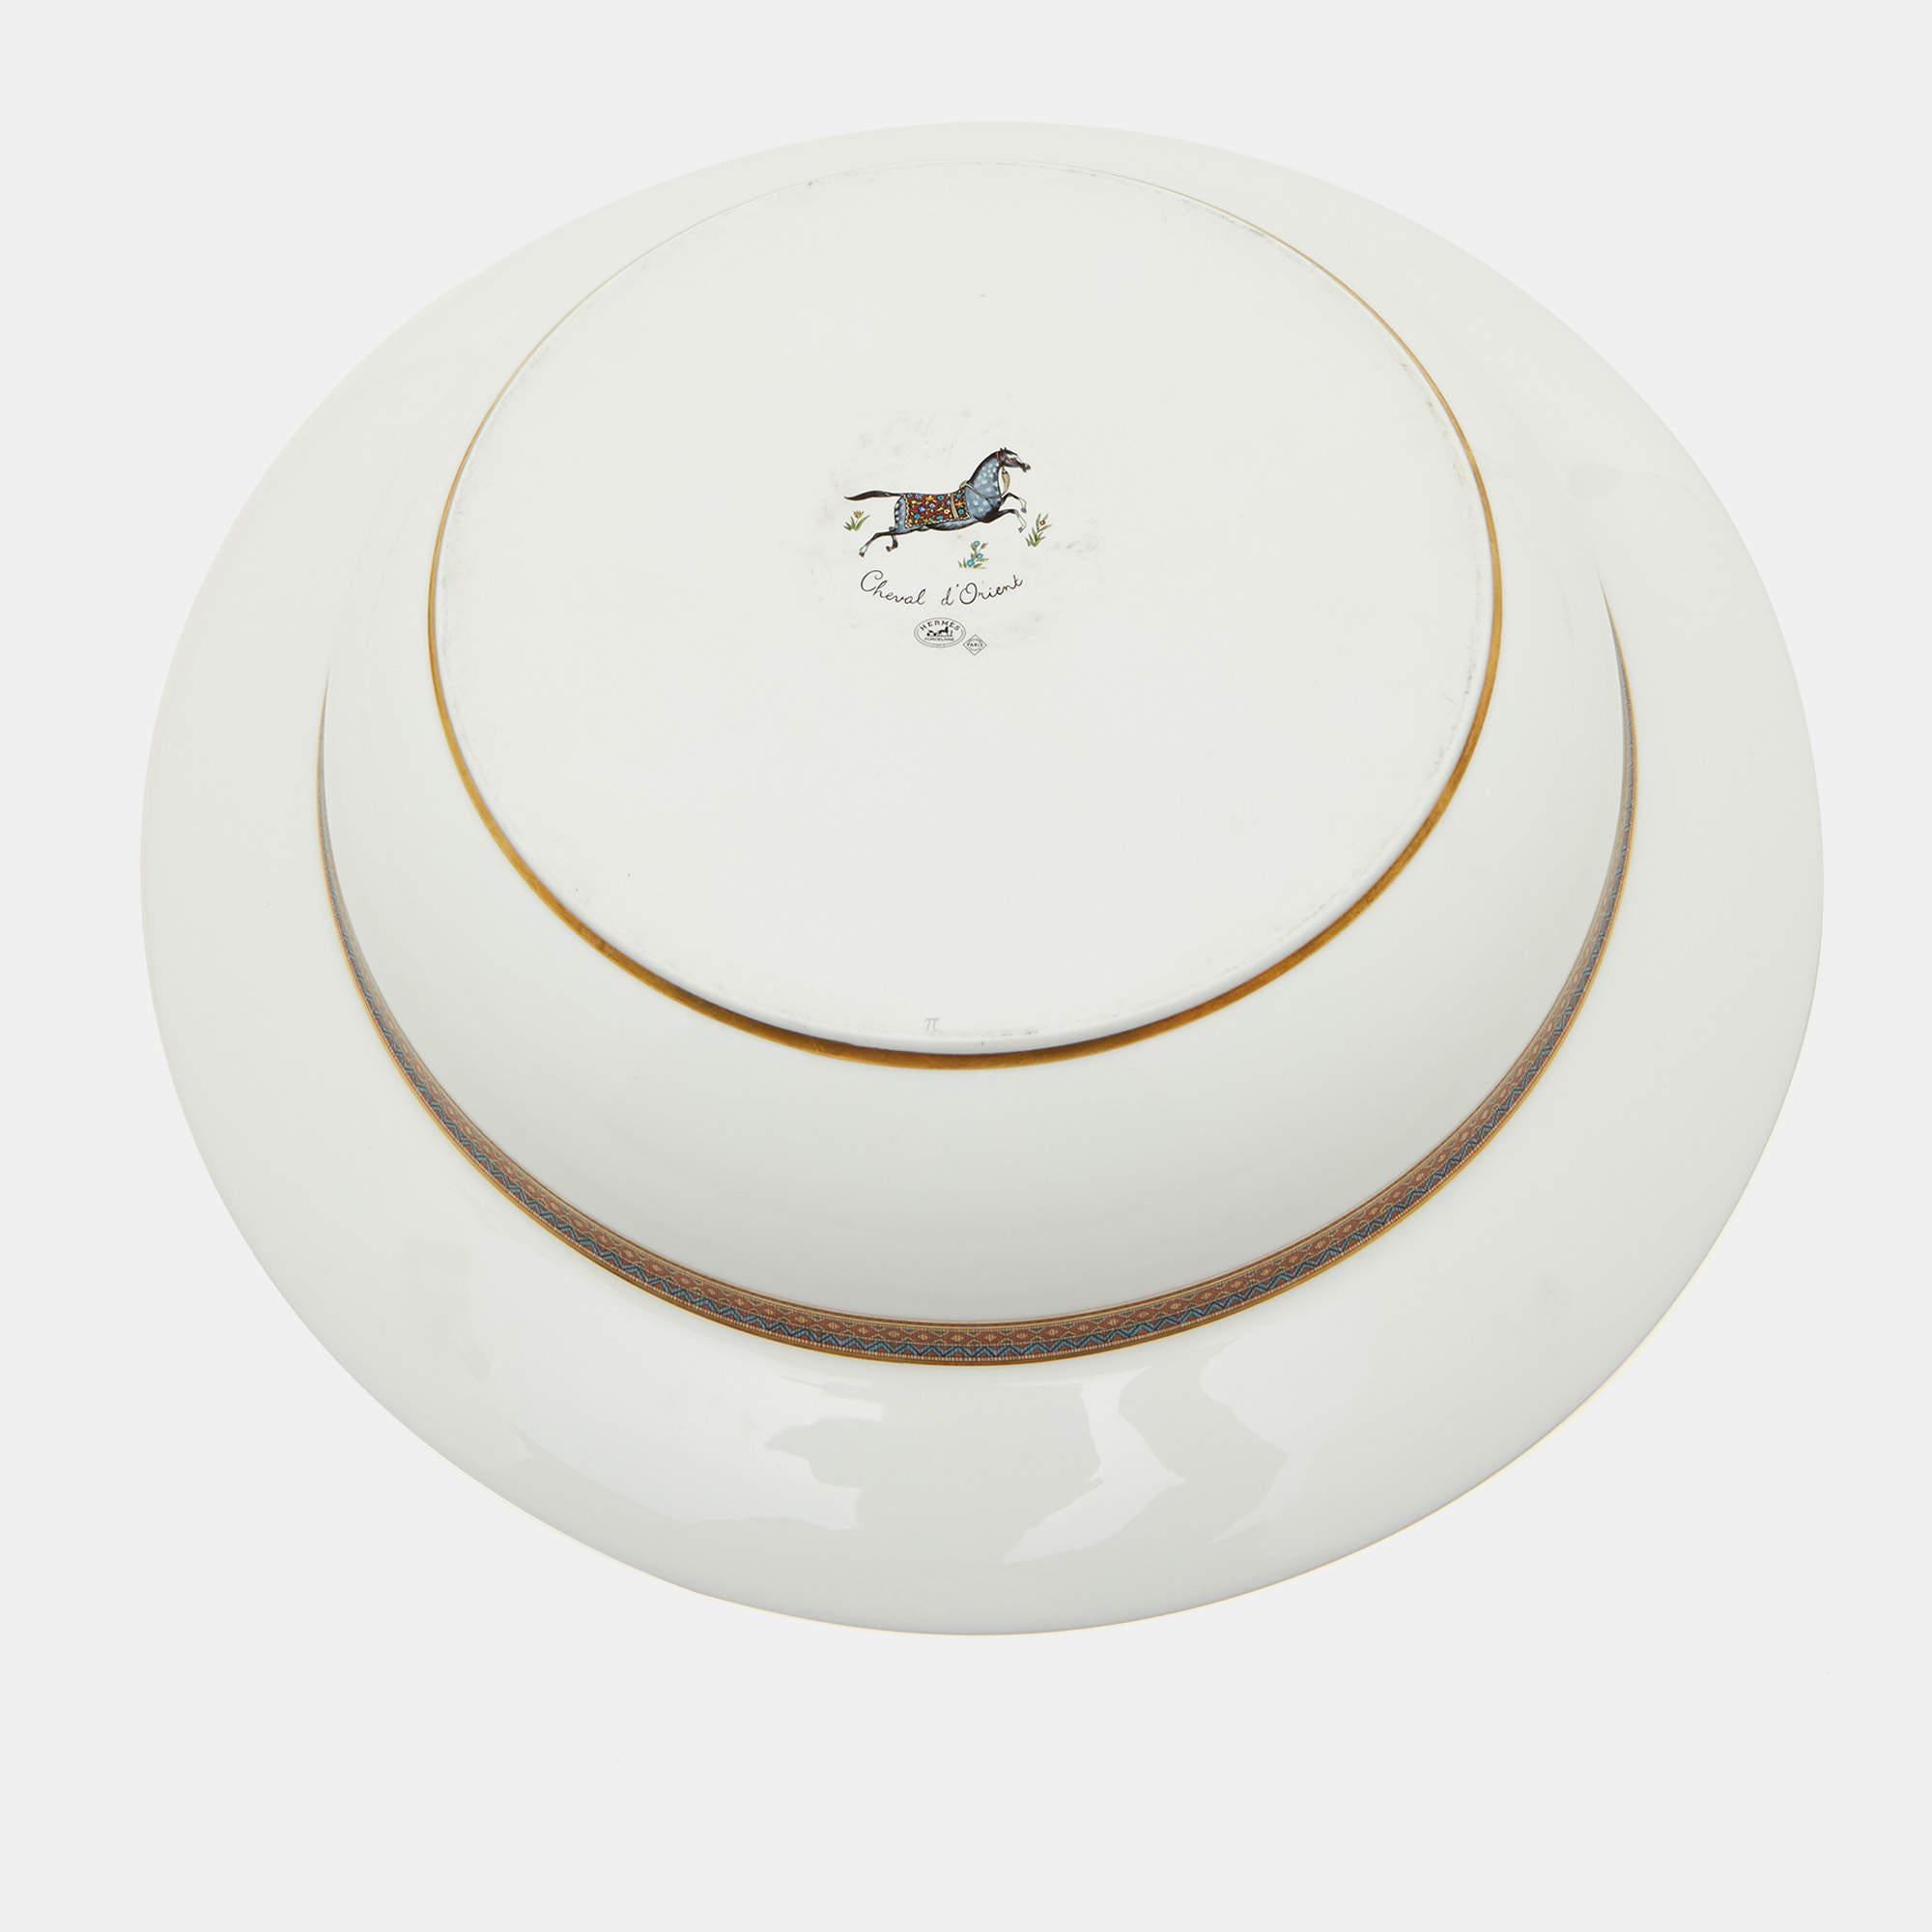 The Hermès centerpiece platter set showcases refined luxury. Crafted with pristine white porcelain, each platter features an exquisite Cheval d'Orient motif, capturing equestrian elegance. Ideal for elegant entertaining, this set of 2 platters adds